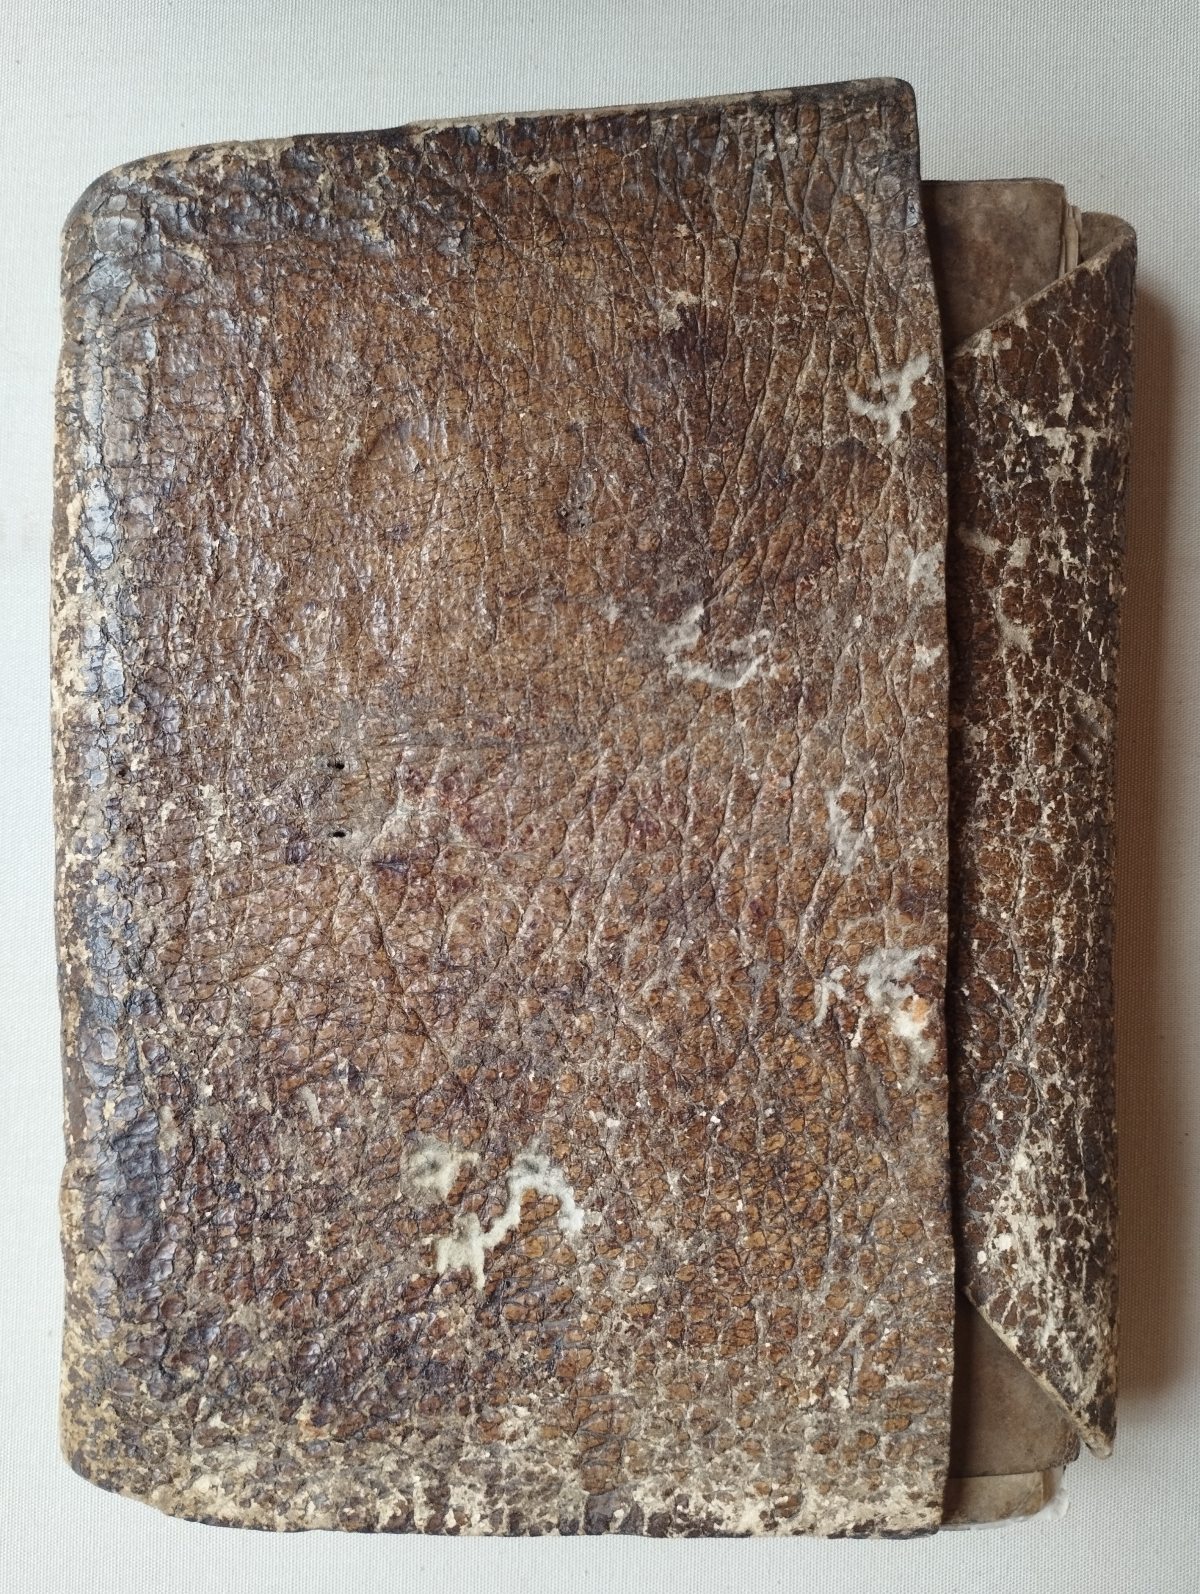 A worn grey leather folder, with sheets of parchment showing under the inner flap.